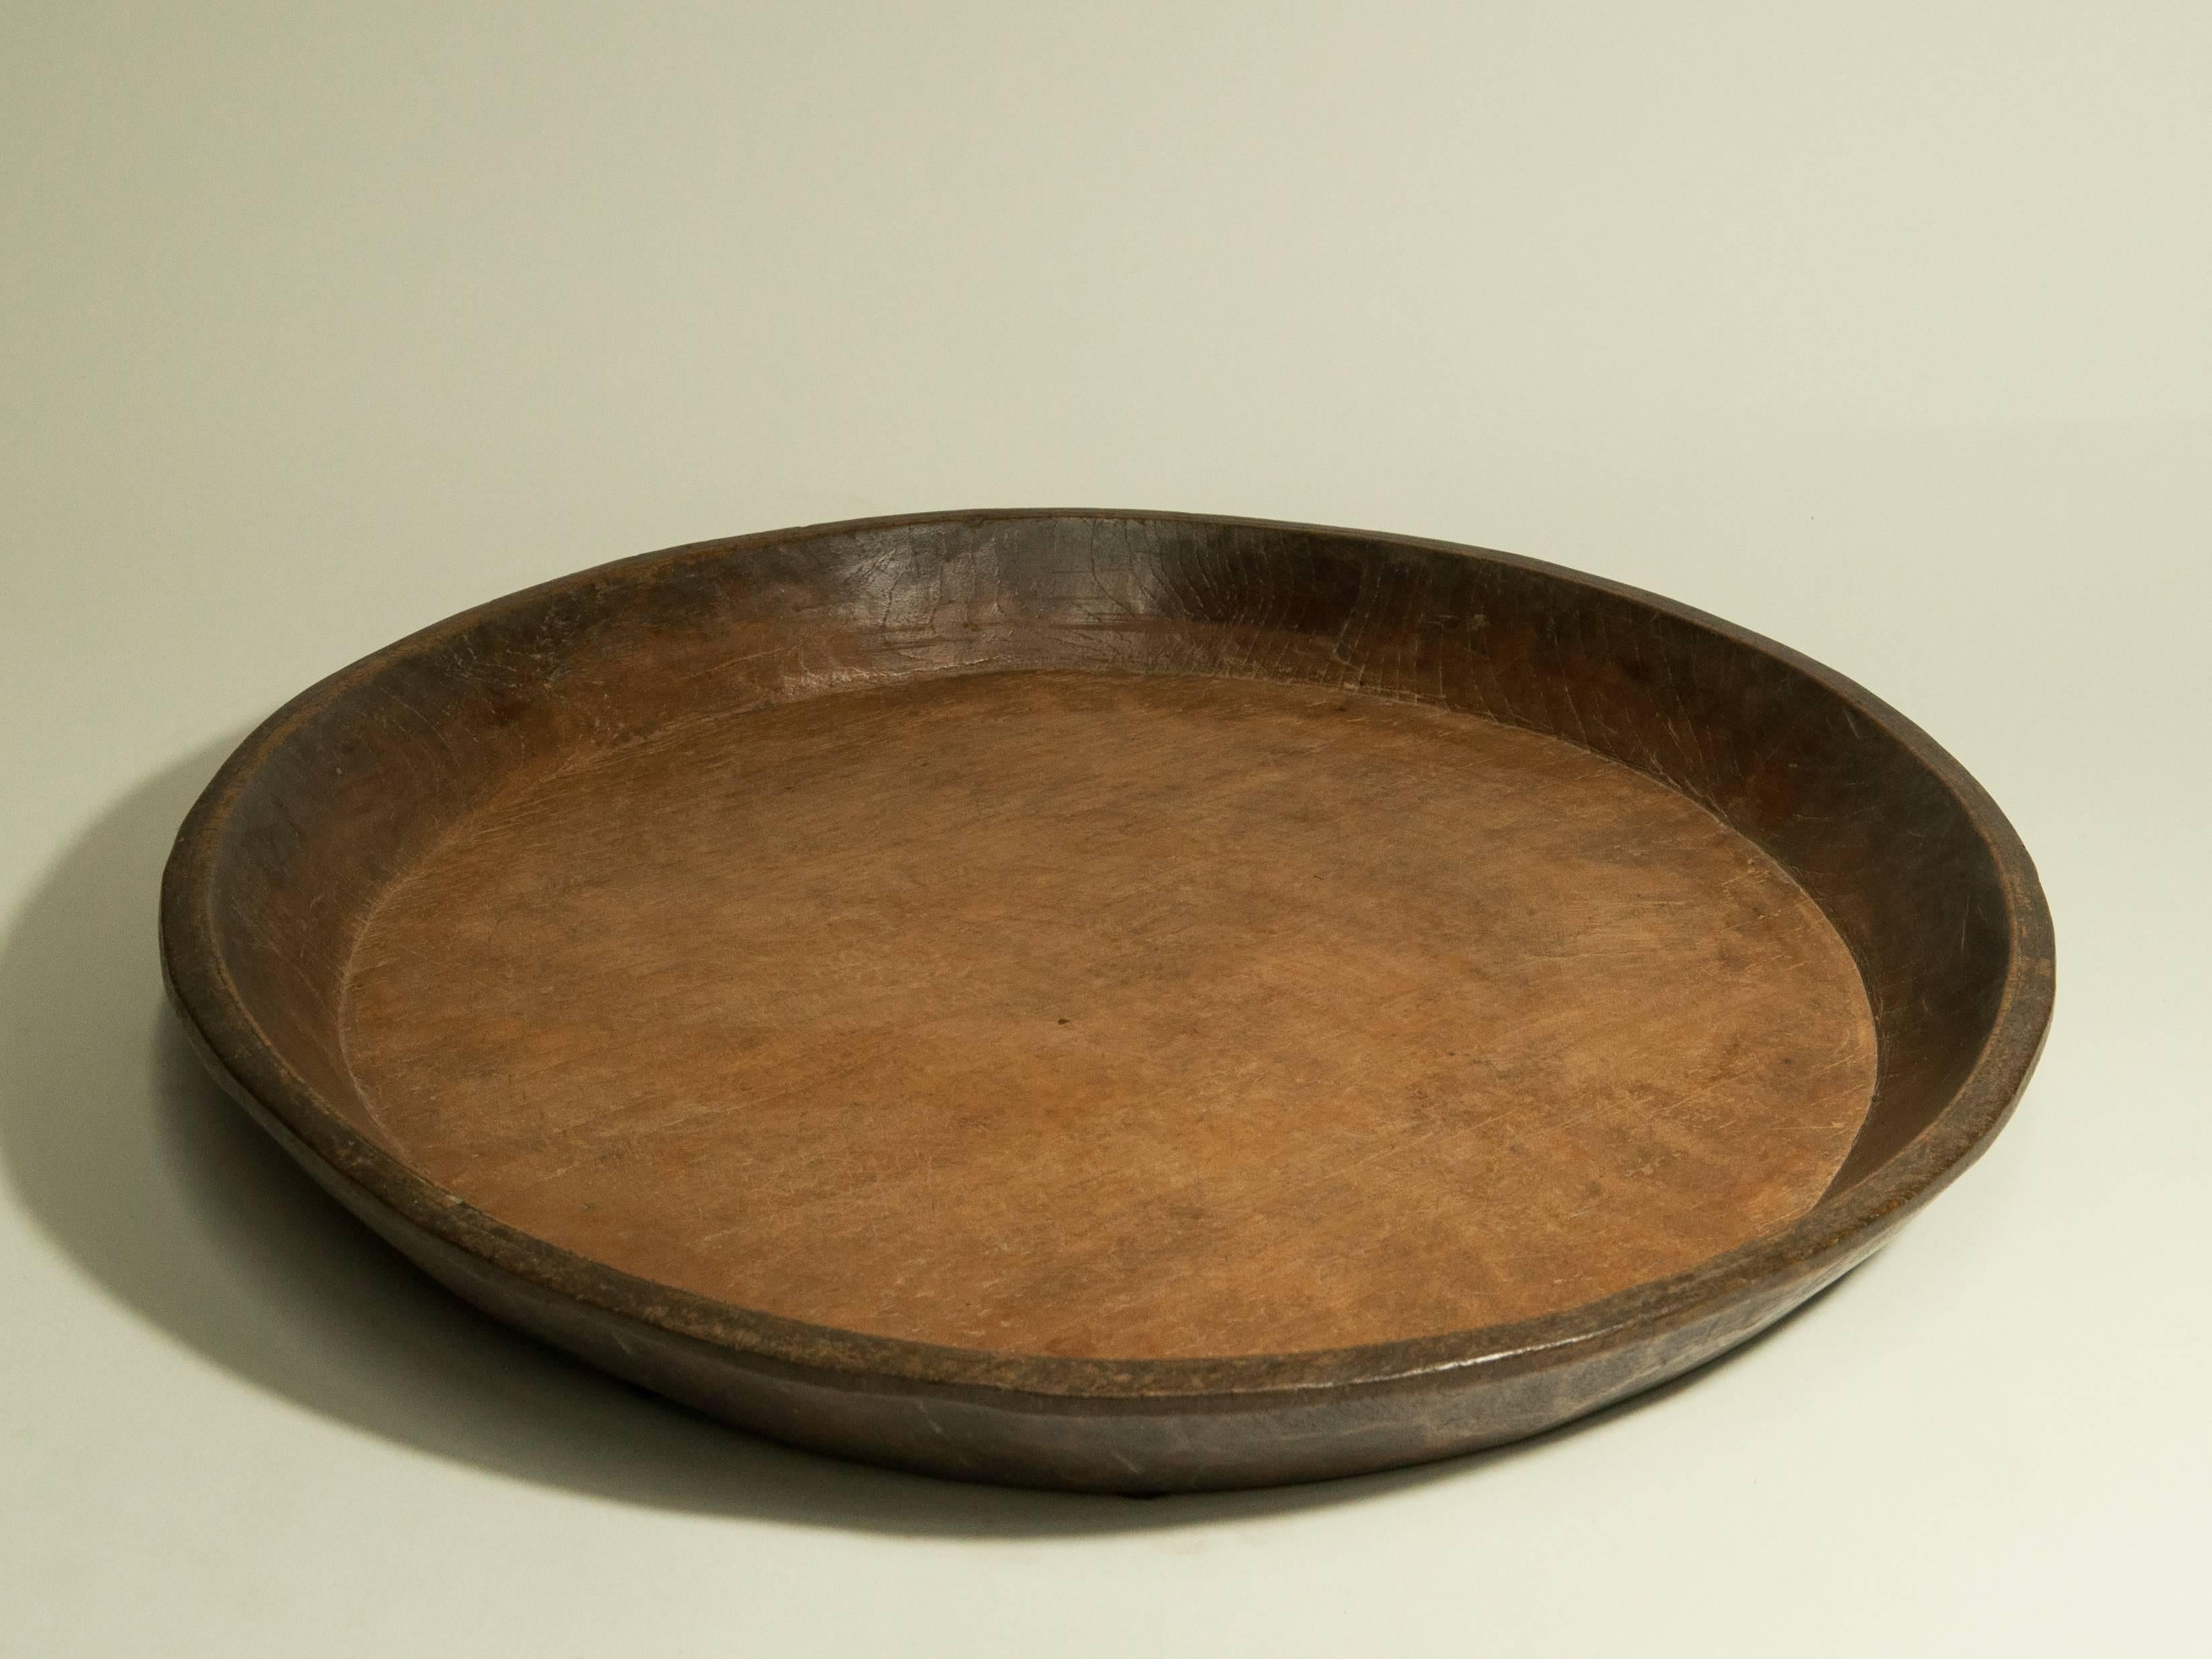 Vintage Hand-Hewn Teak tray from Java. 19 inch diameter. Mid-20th century.
Fashioned from a single piece of teak.
The tray is in excellent condition.
Dimensions: 19 inches diameter by 2 inches high.